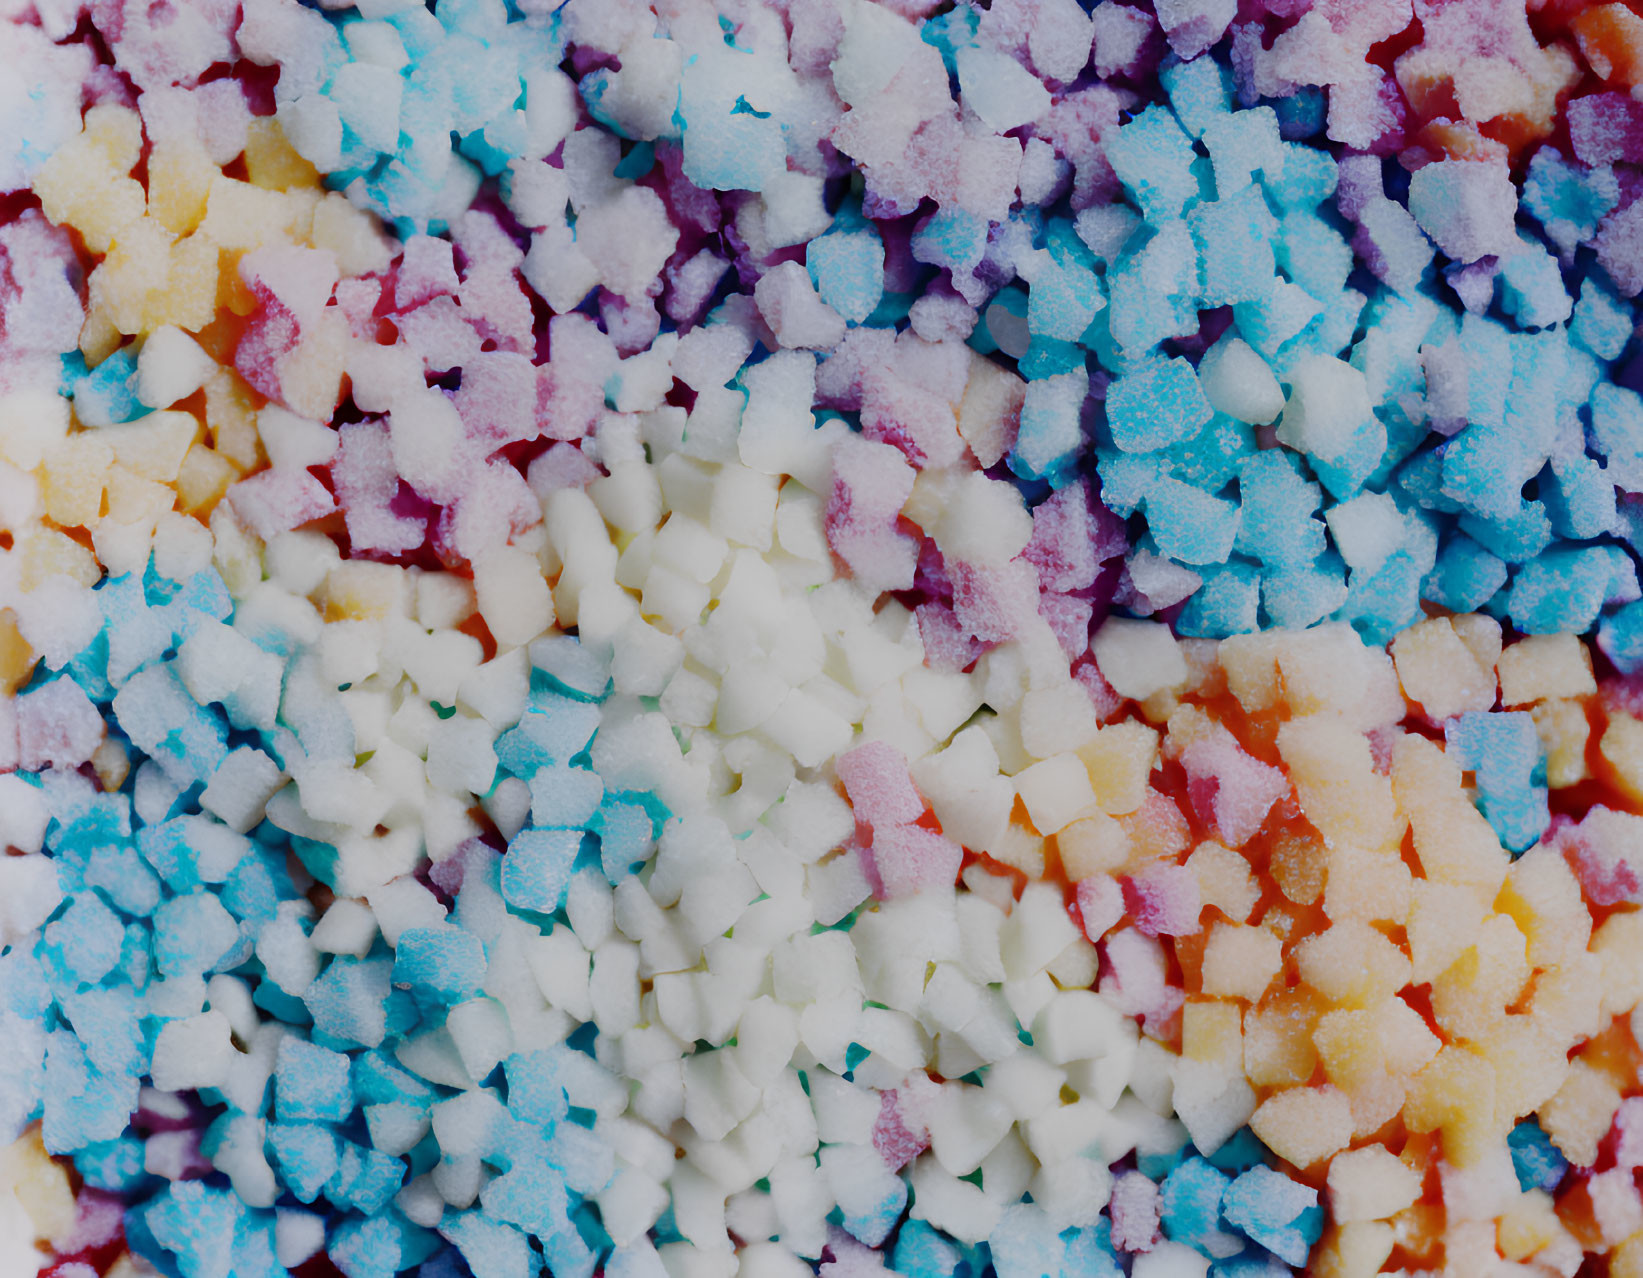 Vibrant circular gradient of colorful granulated particles